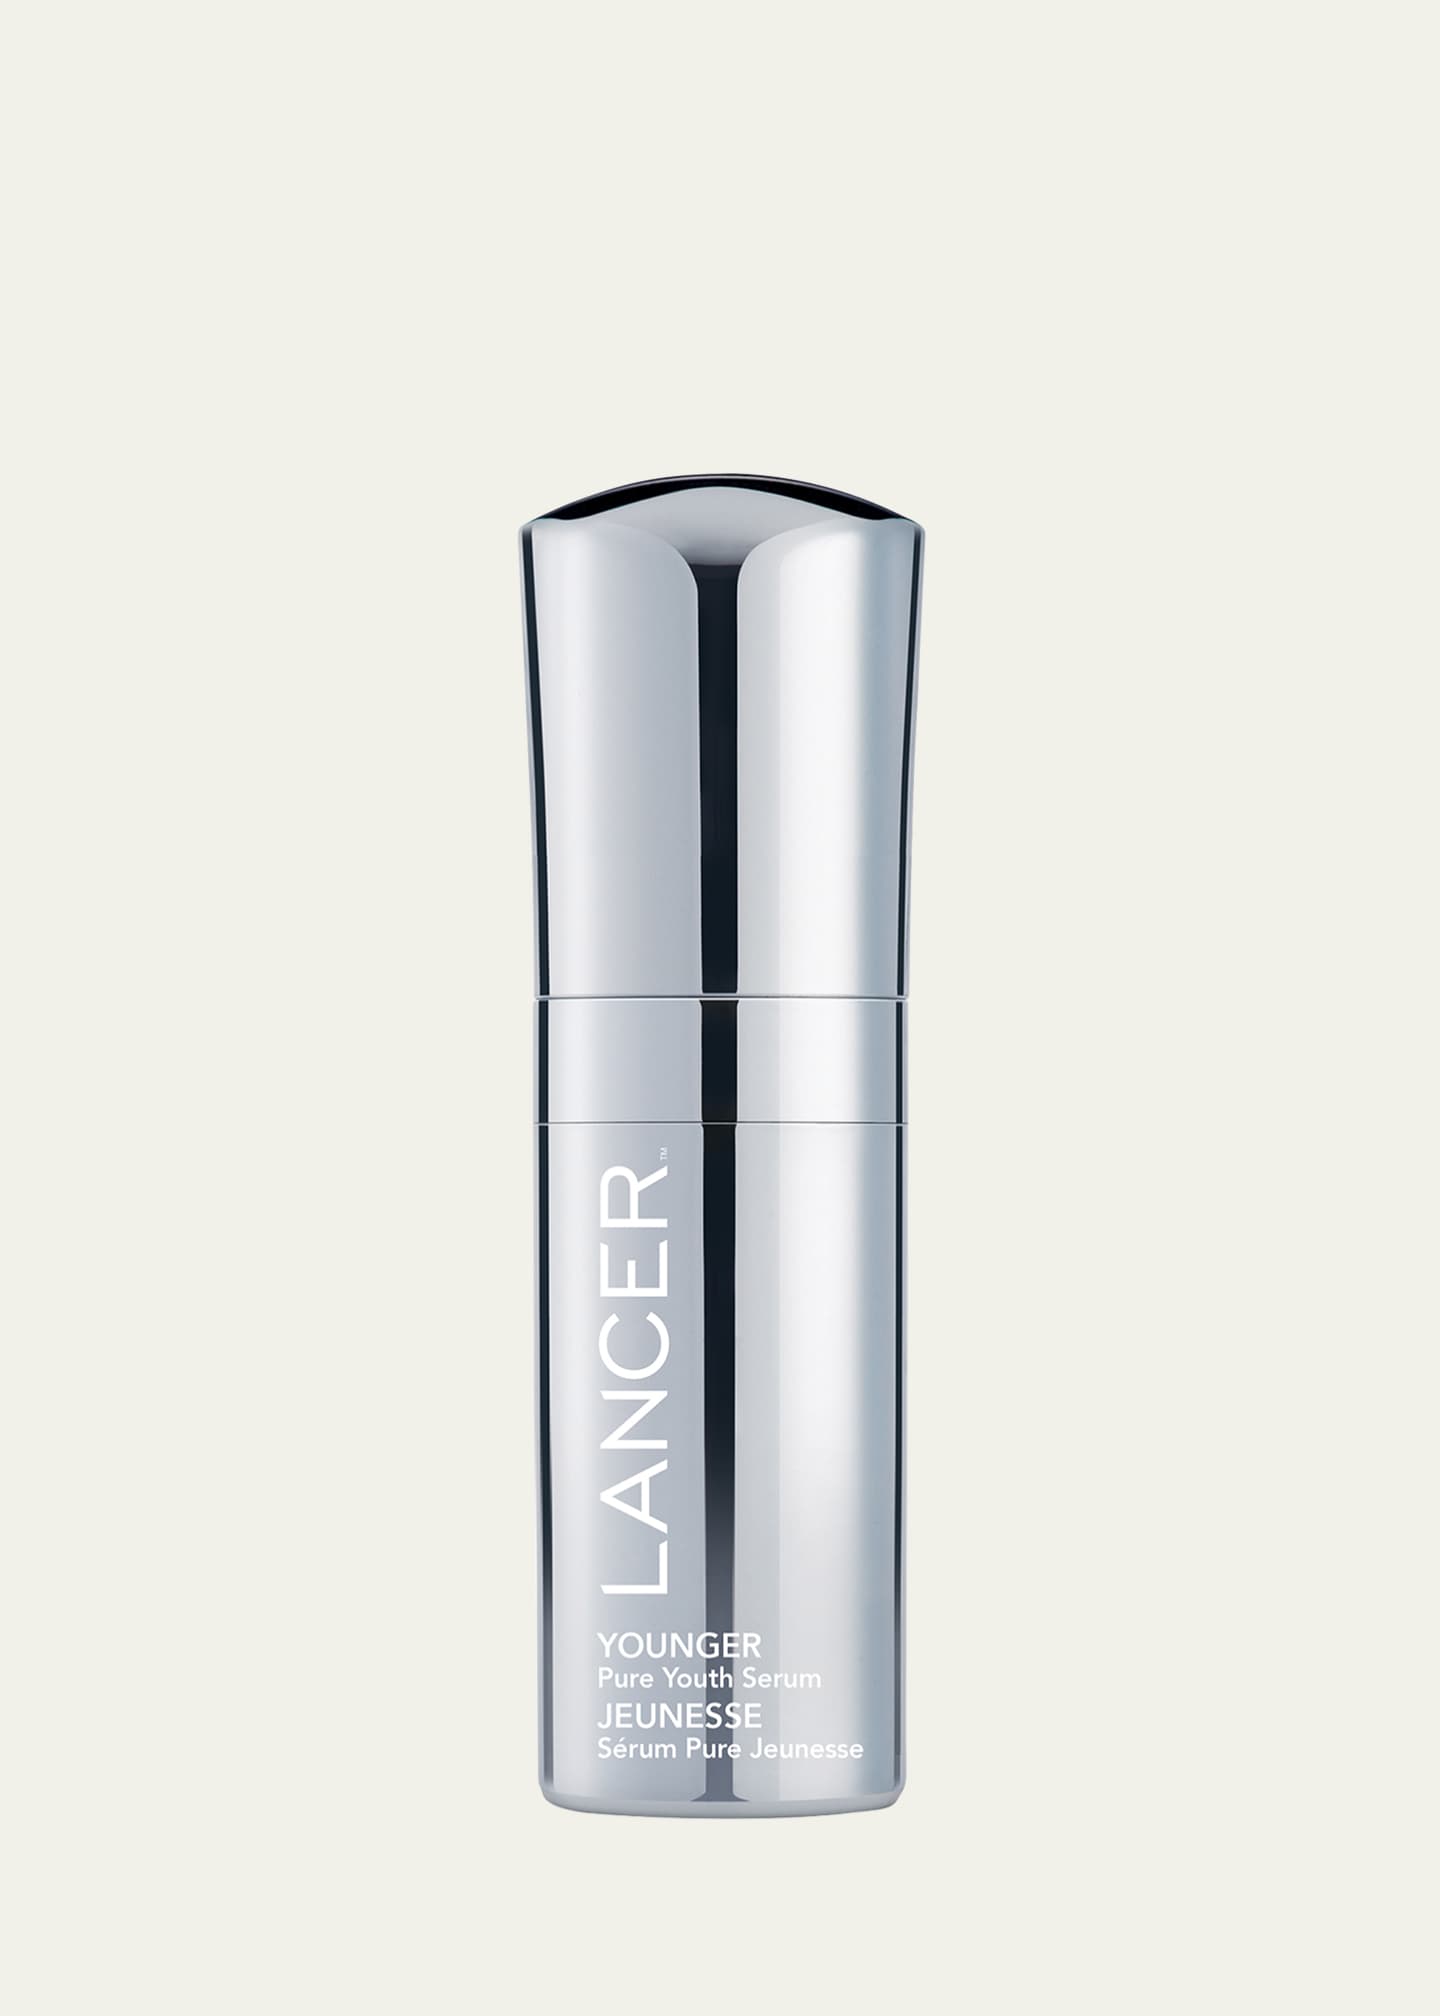 Lancer Younger: Pure Youth Serum, 1 oz./ 30 mL Image 1 of 3